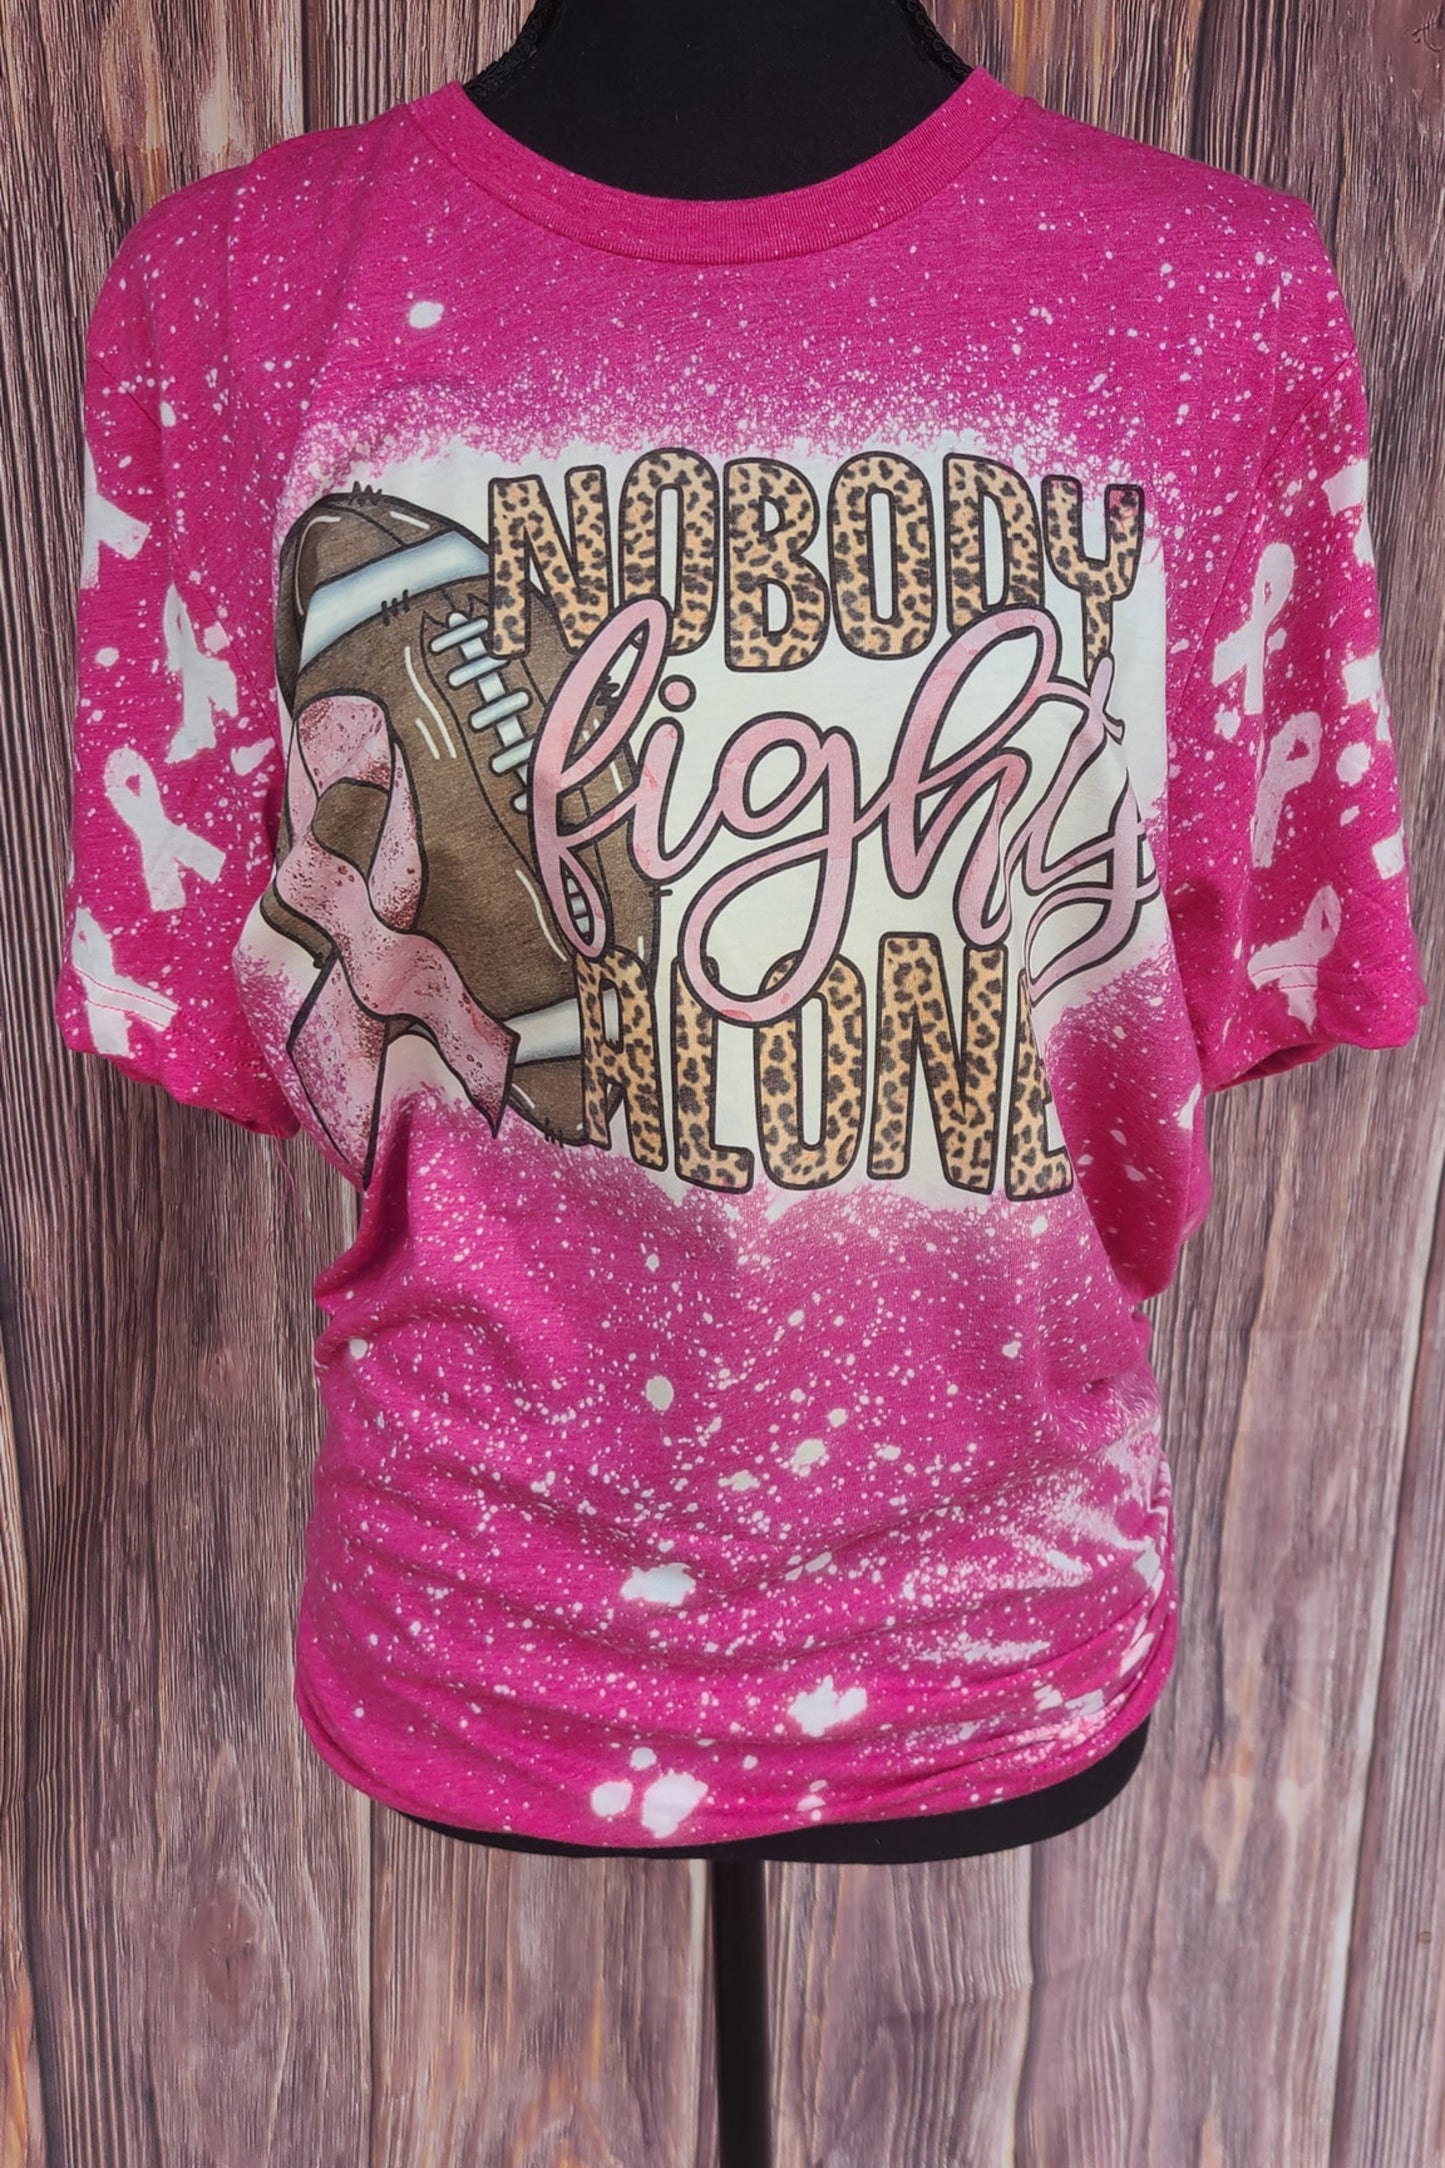 Football "Nobody Fights Alone" Breast Cancer Awareness T-Shirt